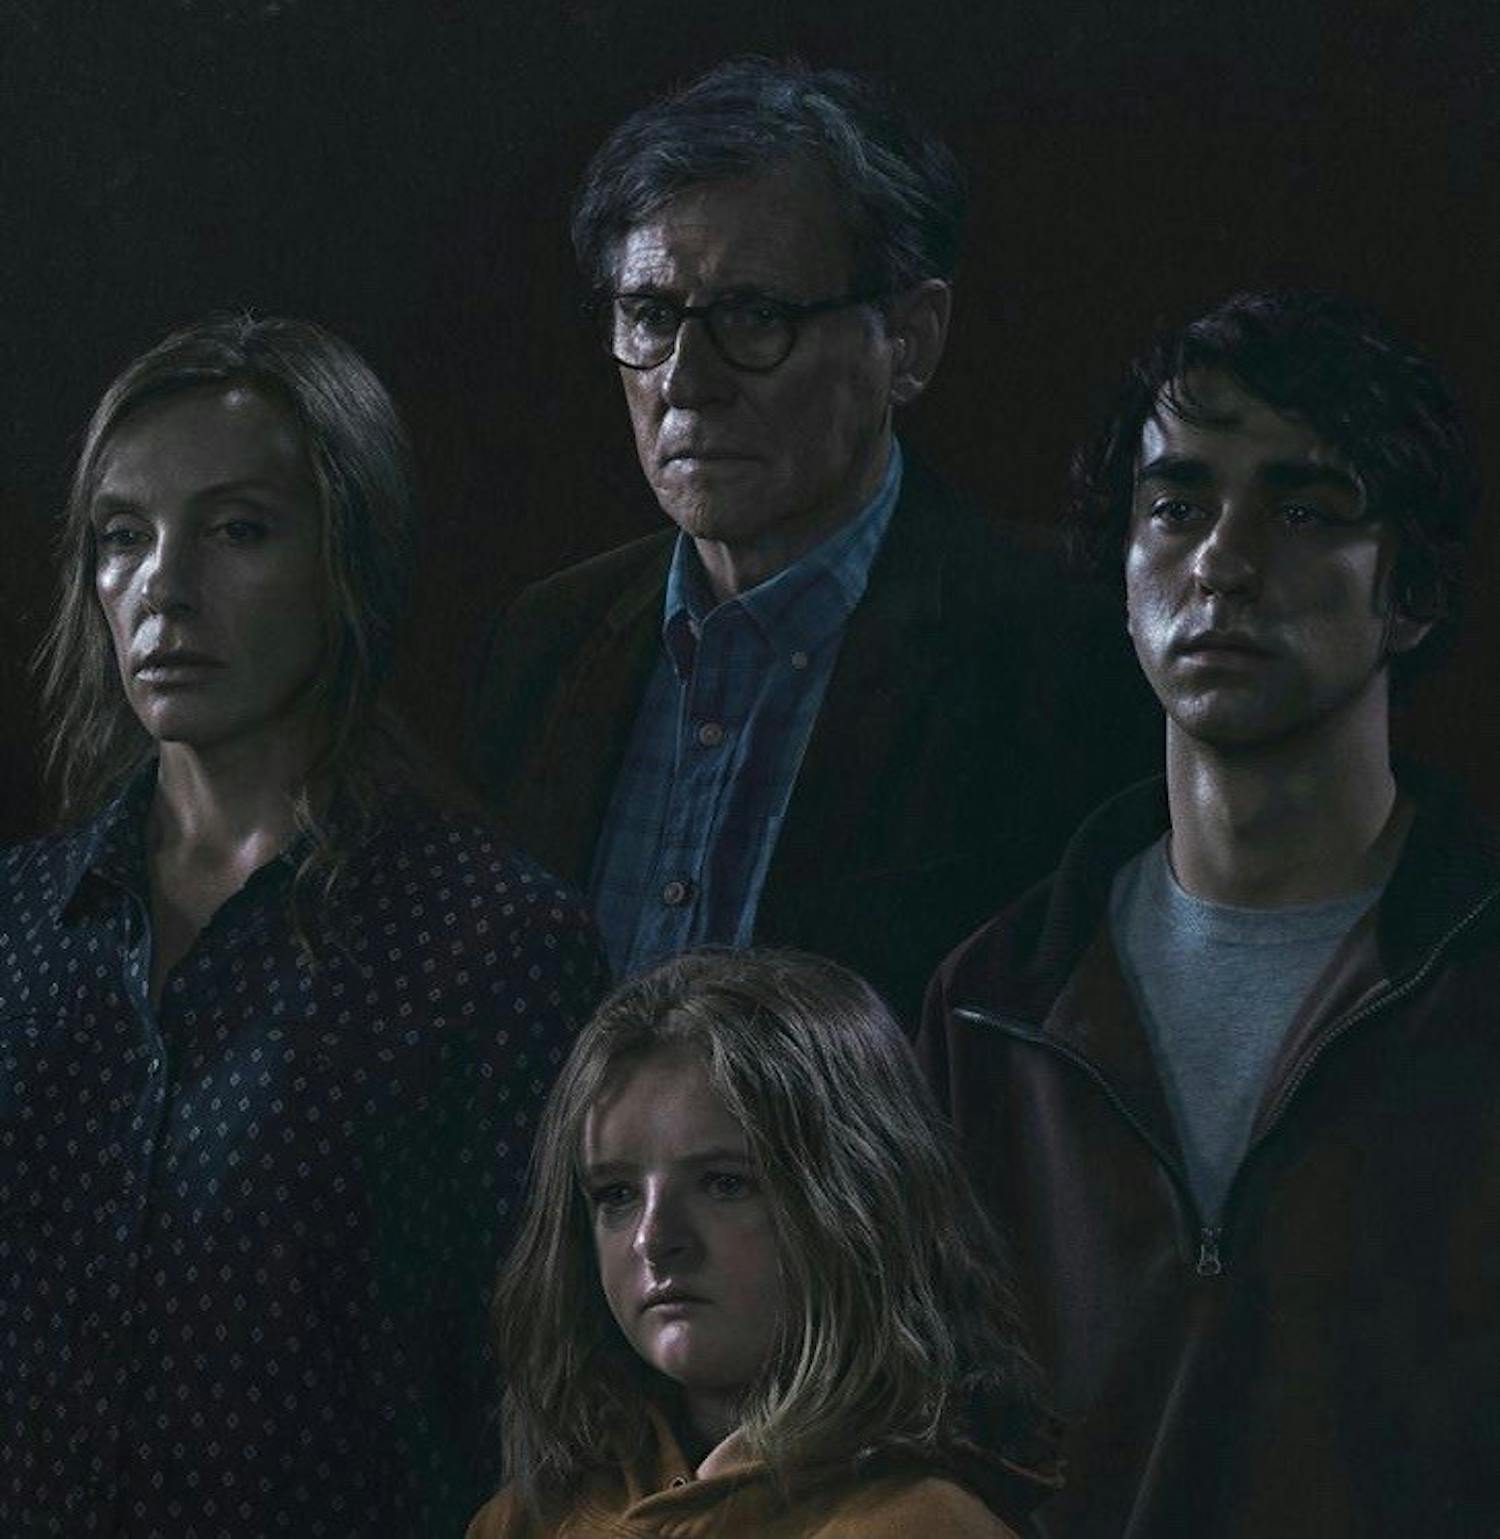 The psychological terror found in "Hereditary" is more akin to "The Witch" and&nbsp;"The Babadook" than&nbsp;"Friday the 13th."